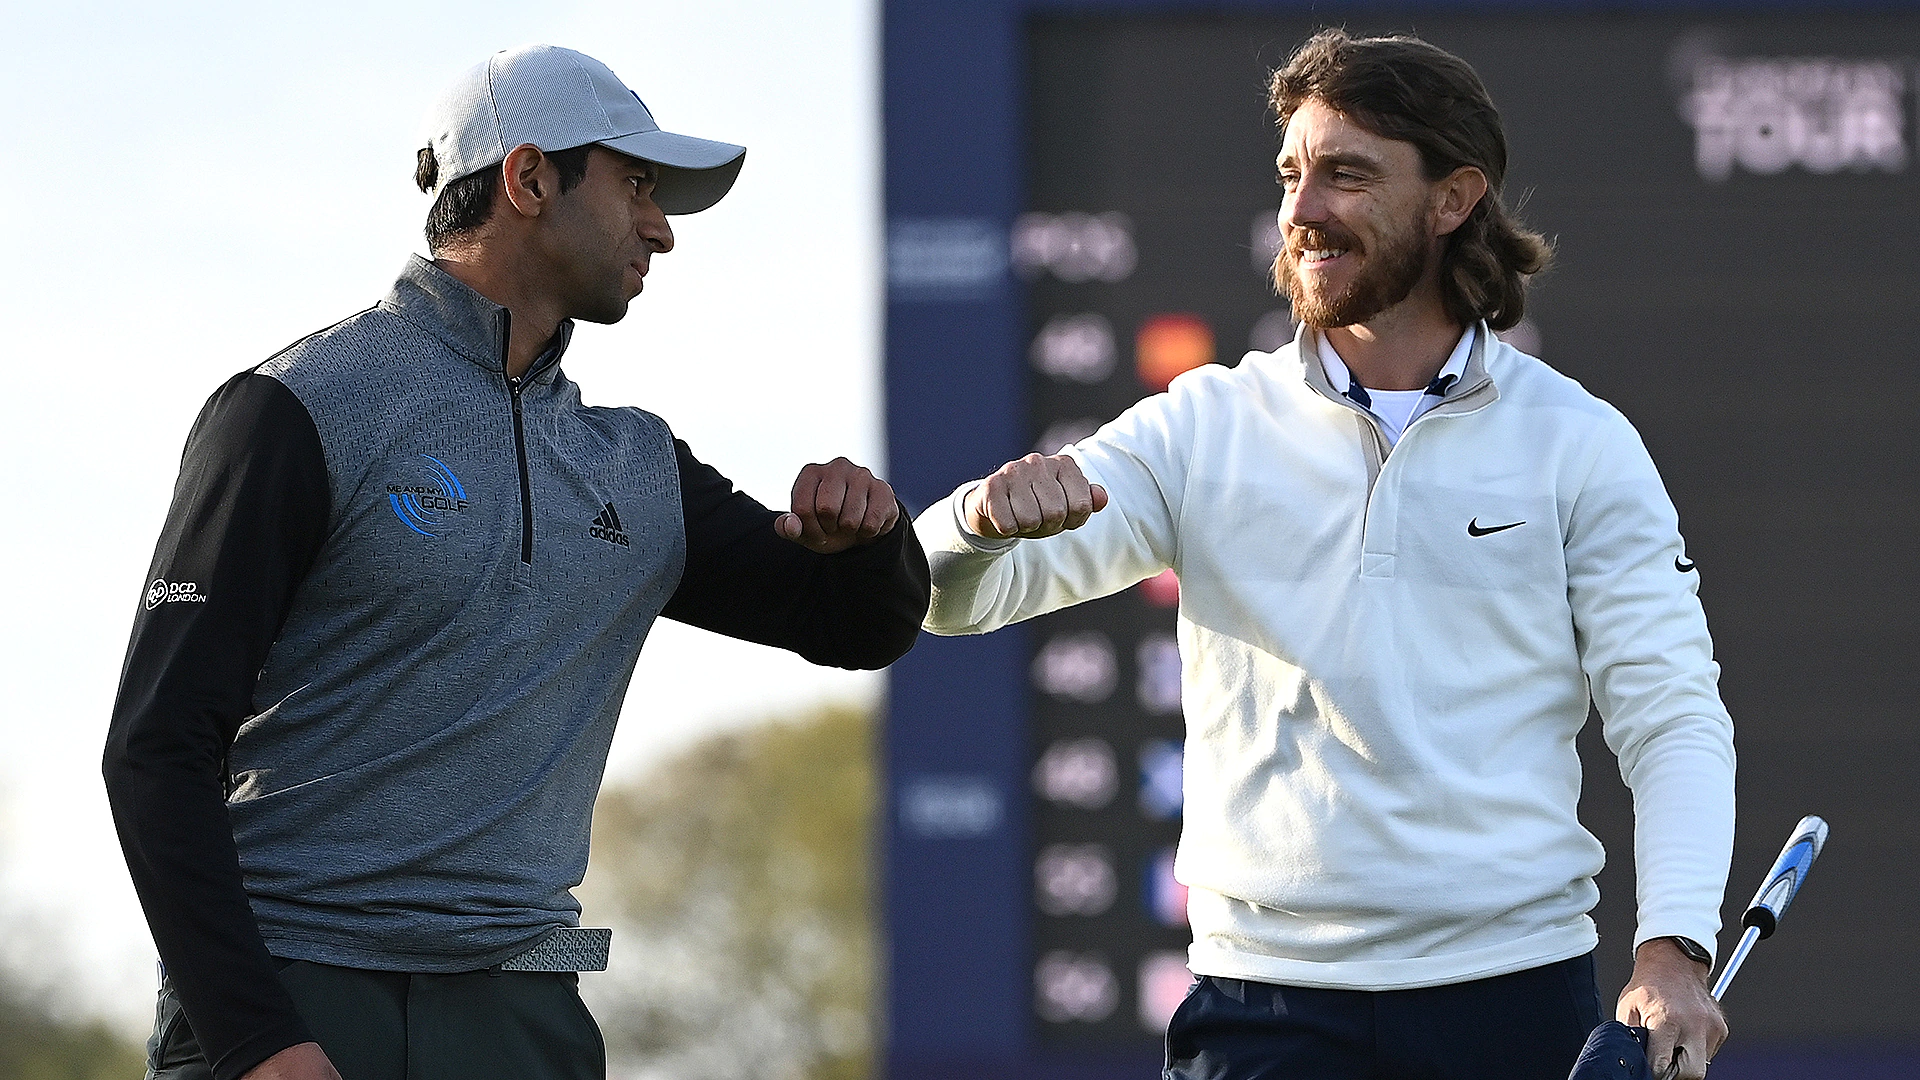 Aaron Rai defeats Tommy Fleetwood in playoff to win Scottish Open